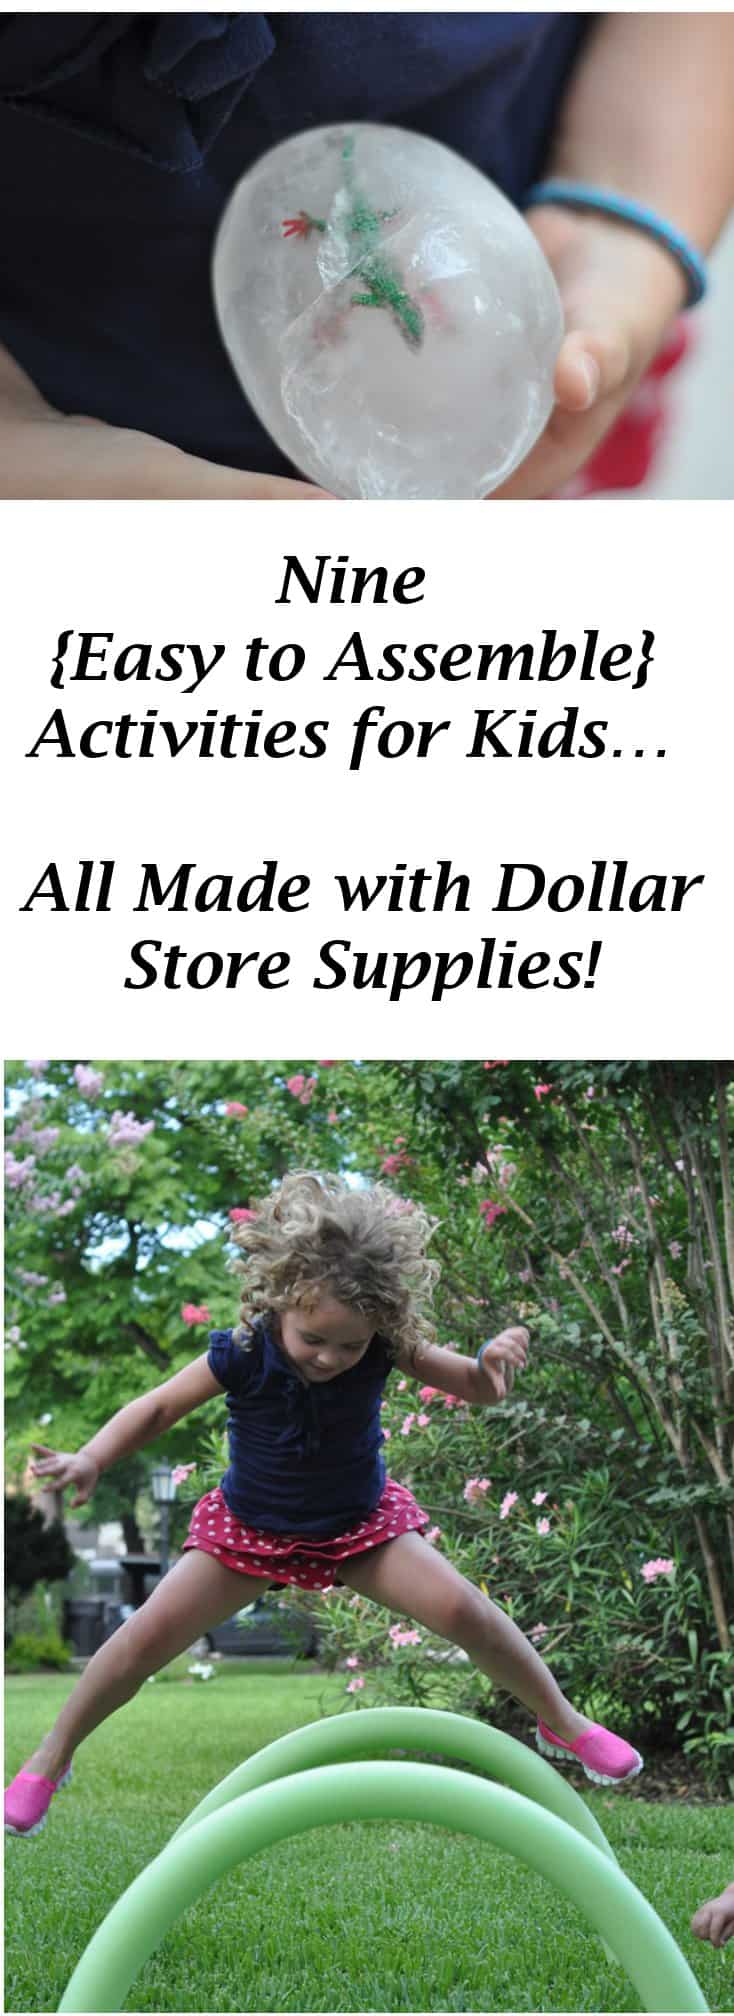 9 {Easy to Assemble} Activities for Kids… All Made with Dollar Store Supplies